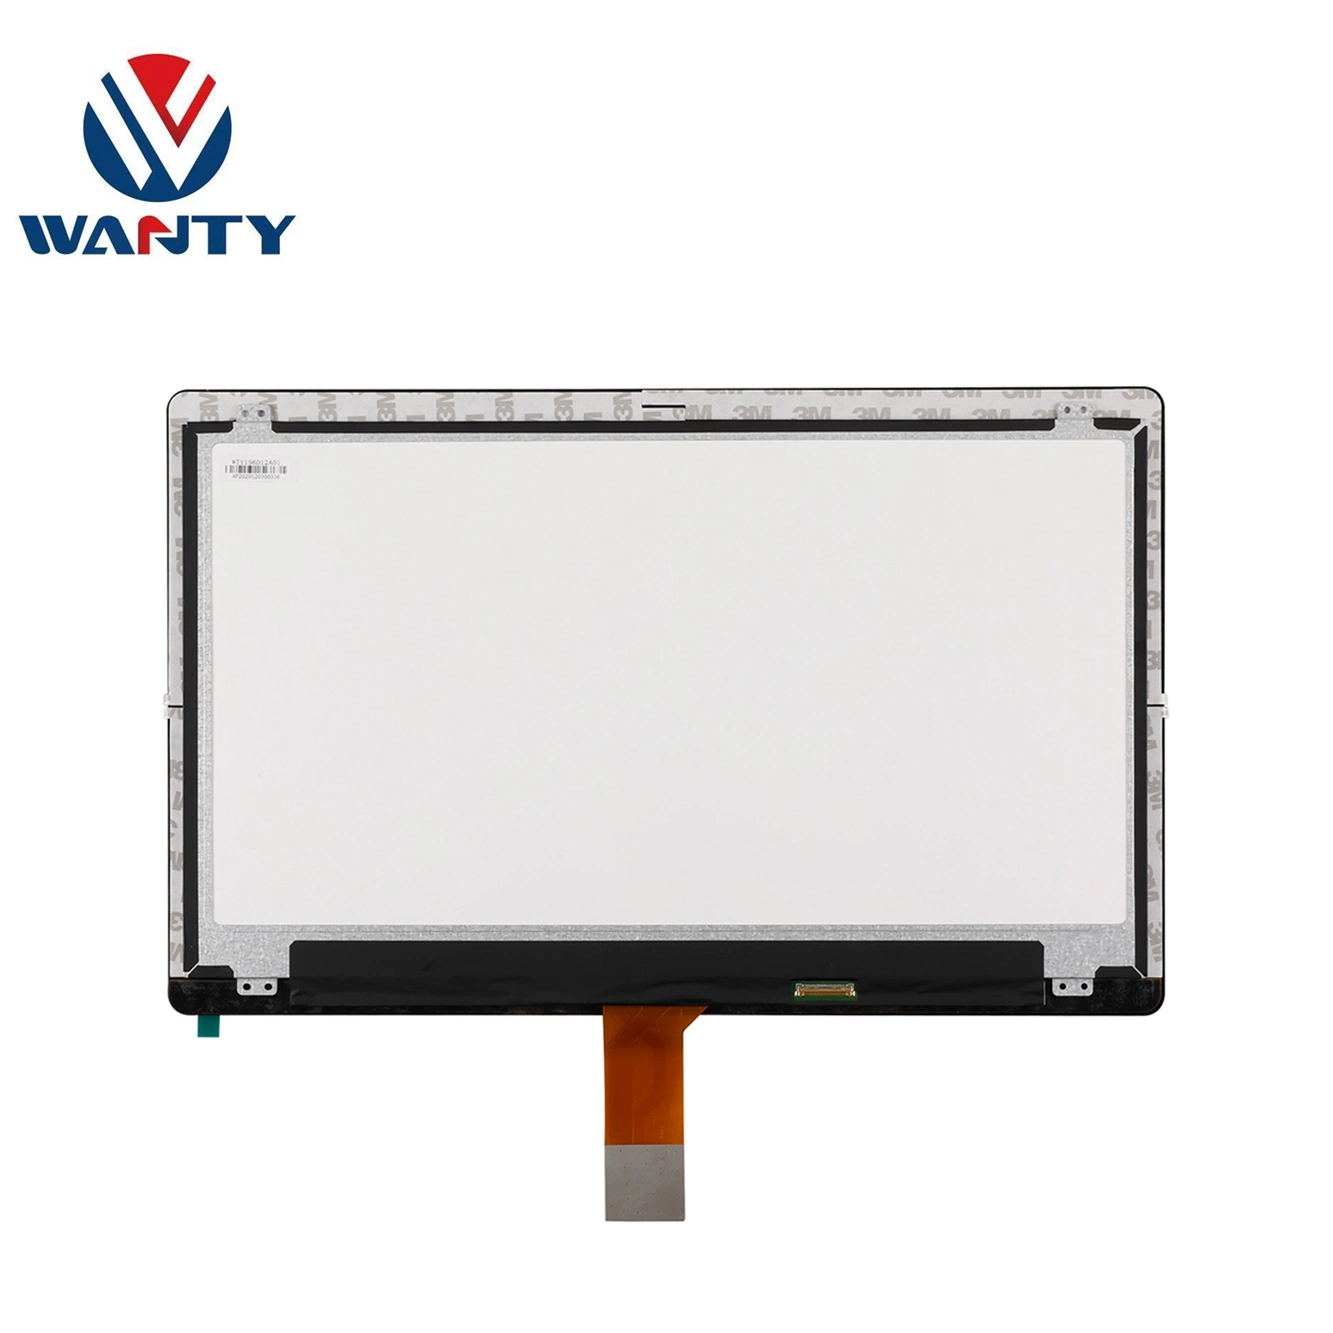 Sunlight Readable 15.6 Inch 1920x1080 LVDS IPS LCD Module TFT Display USB Cap Touchscreen PCAP Projected Capacitive Touch Panel Screen